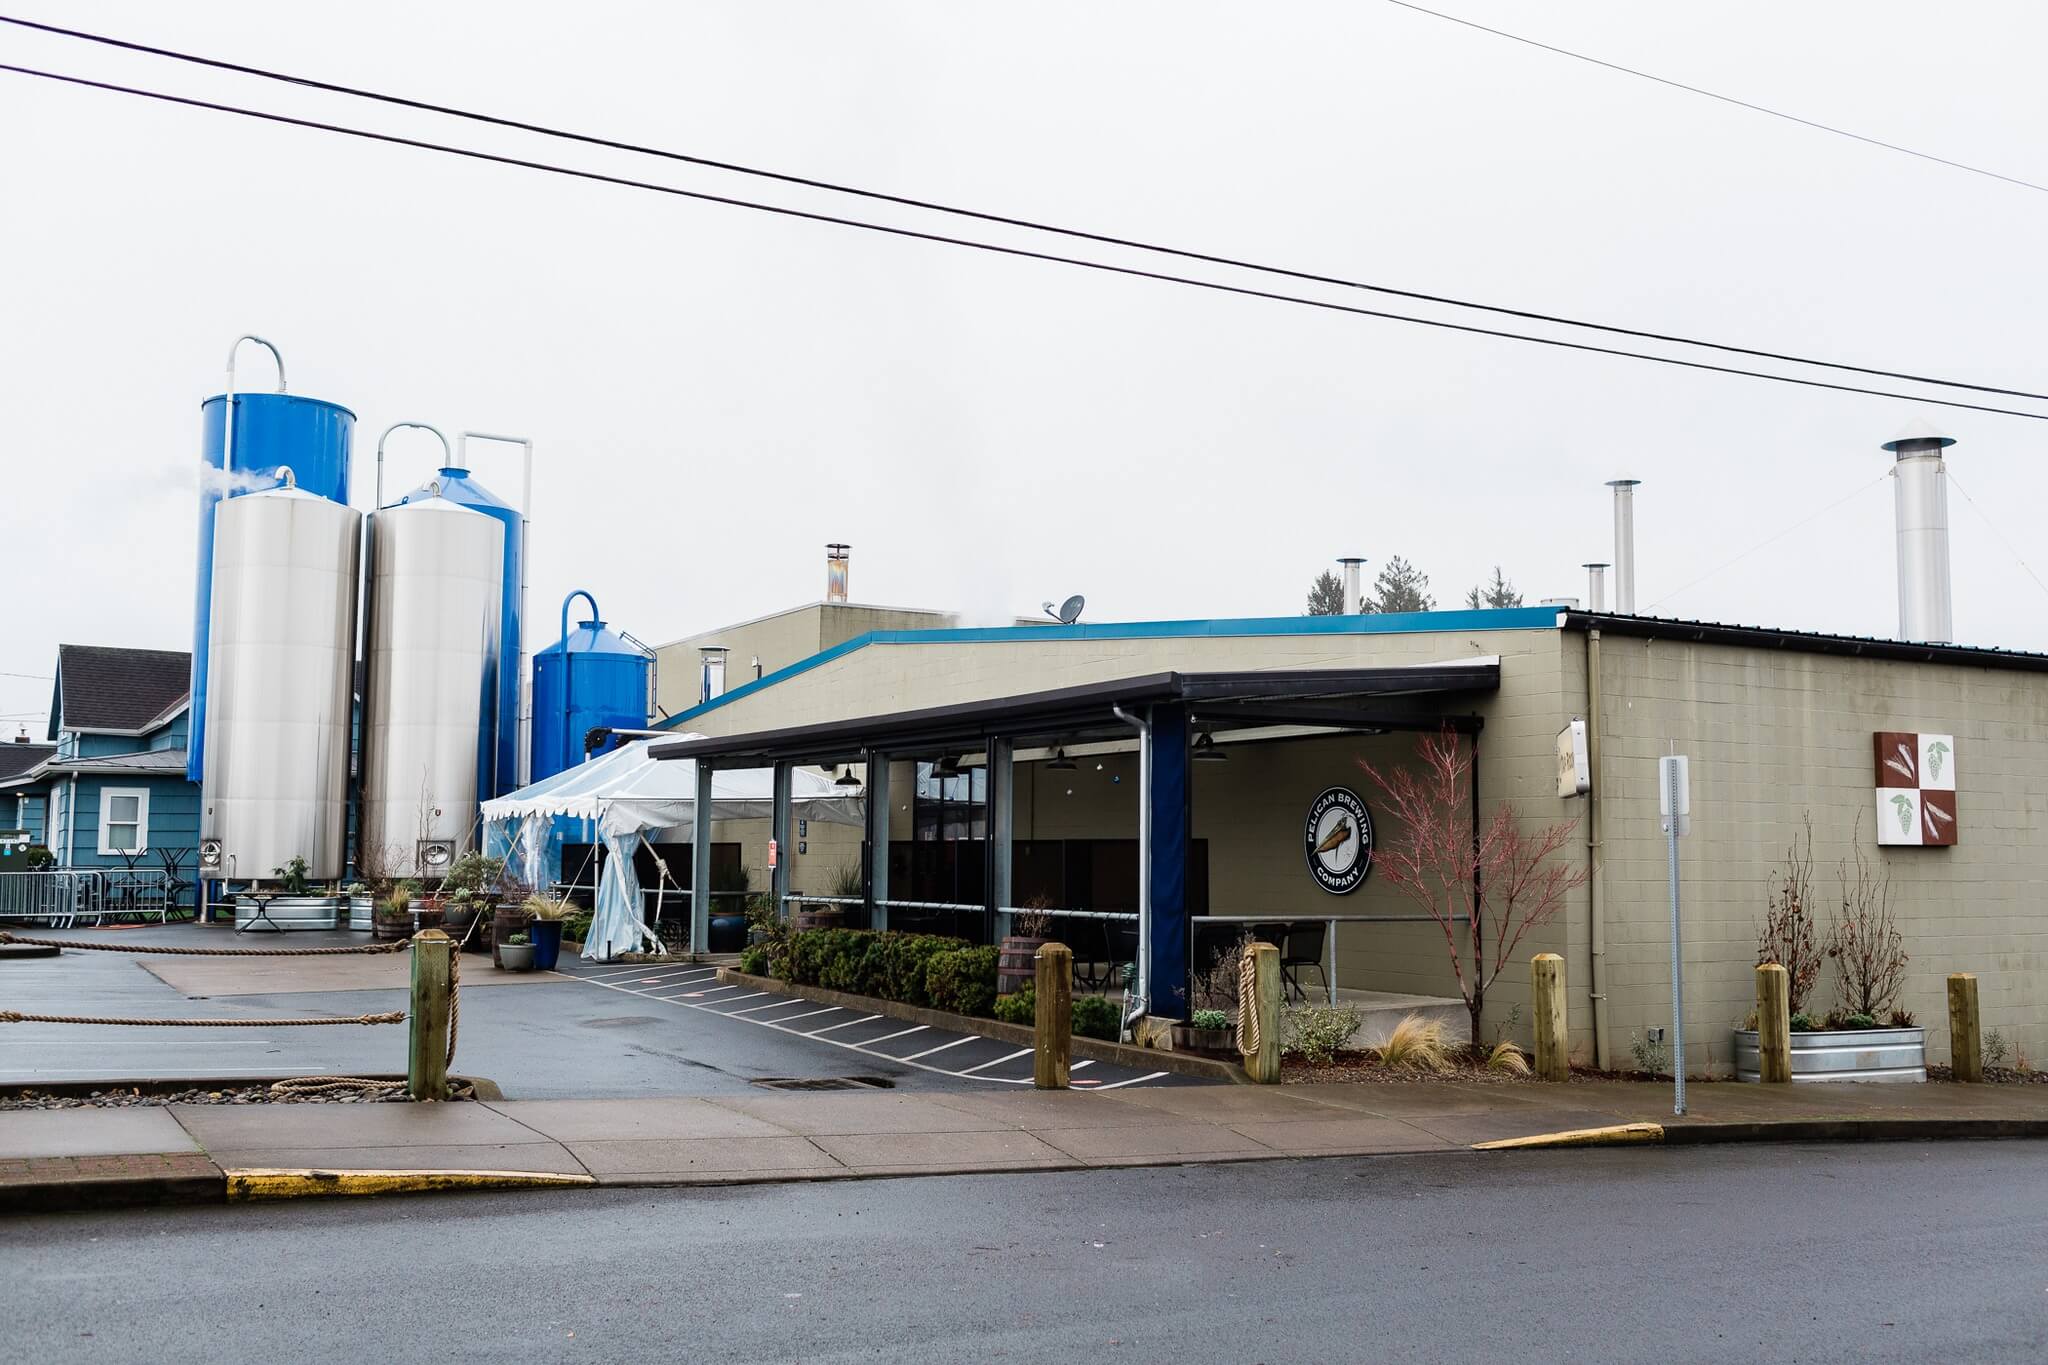 Outside view of the taproom. Five large tanks sit outside, part of the brewing process.